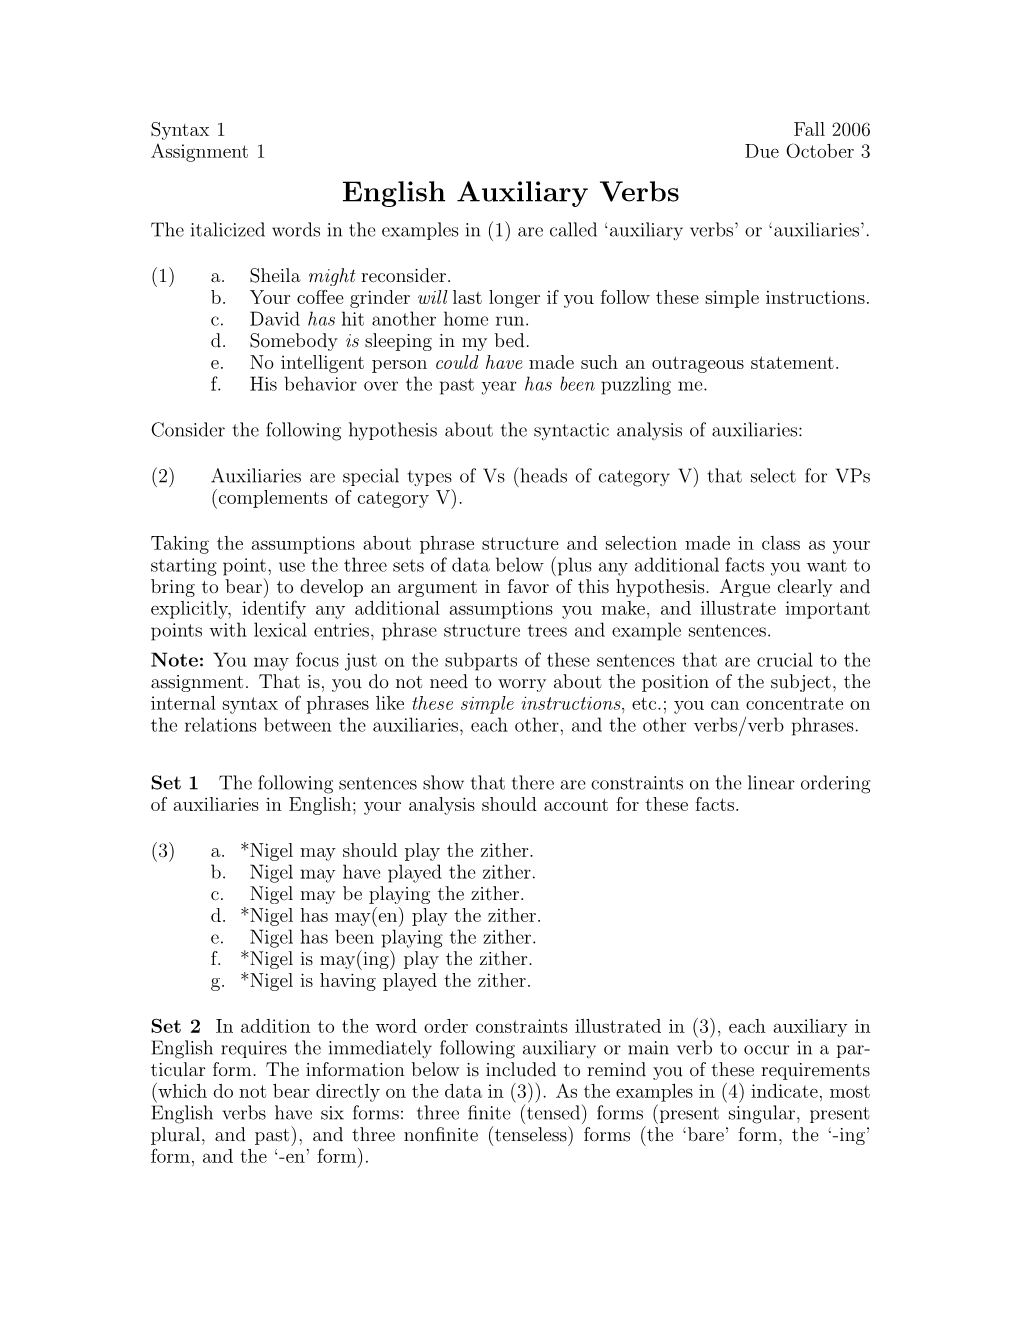 English Auxiliary Verbs the Italicized Words in the Examples in (1) Are Called ‘Auxiliary Verbs’ Or ‘Auxiliaries’